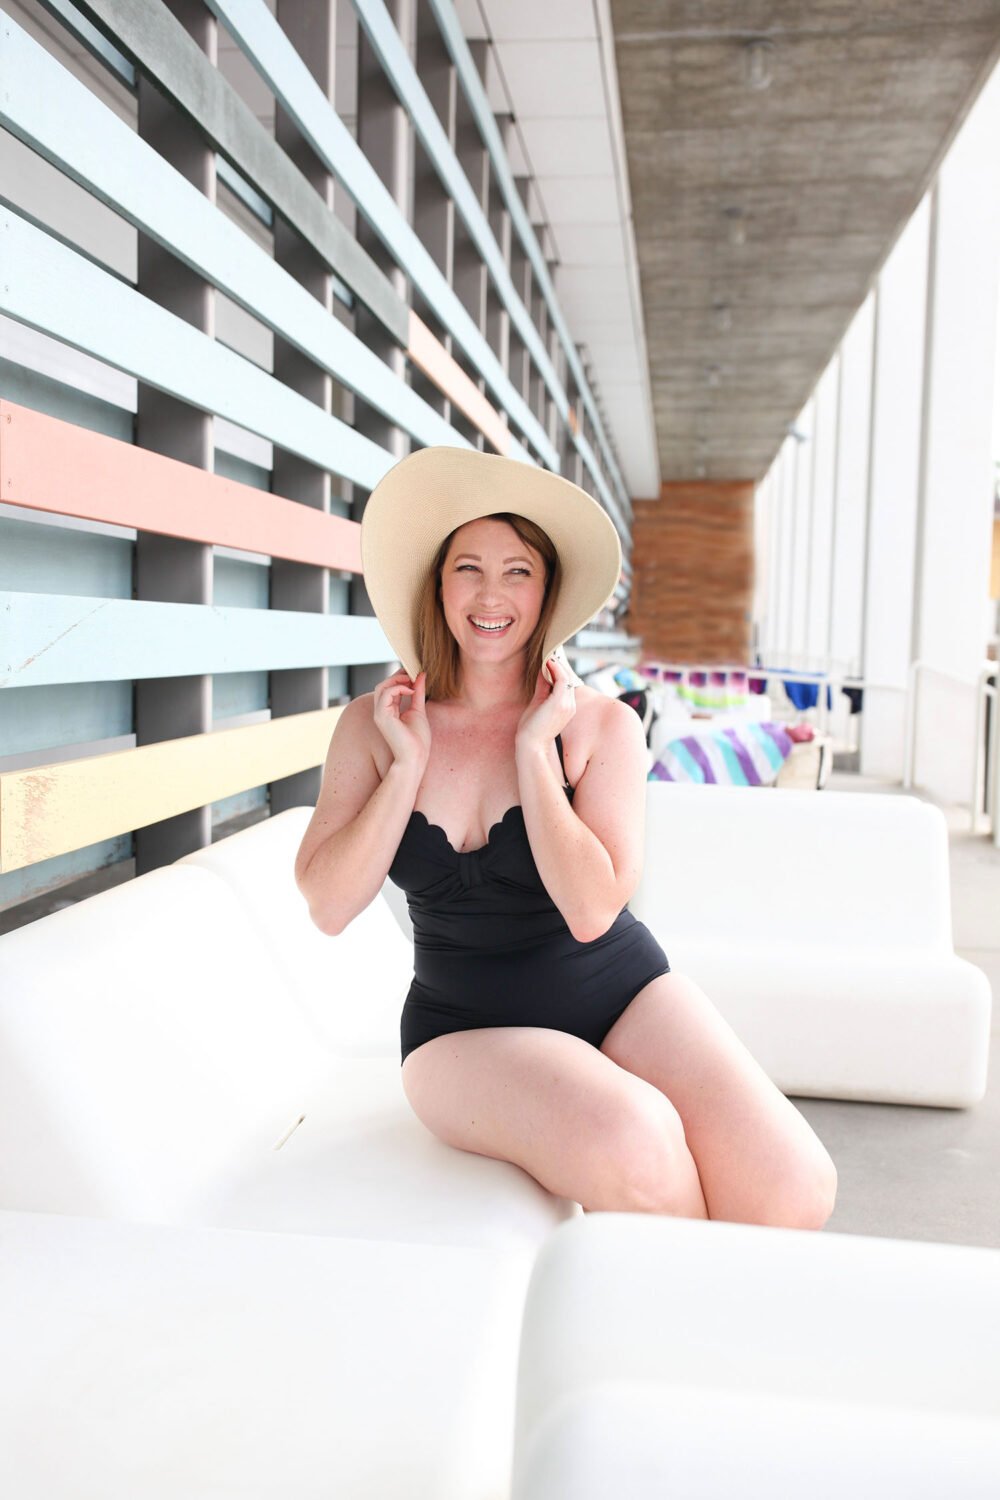 On the hunt for a great black bathing suit? This scalloped swim suit is SUPER flattering on a pear shape body!